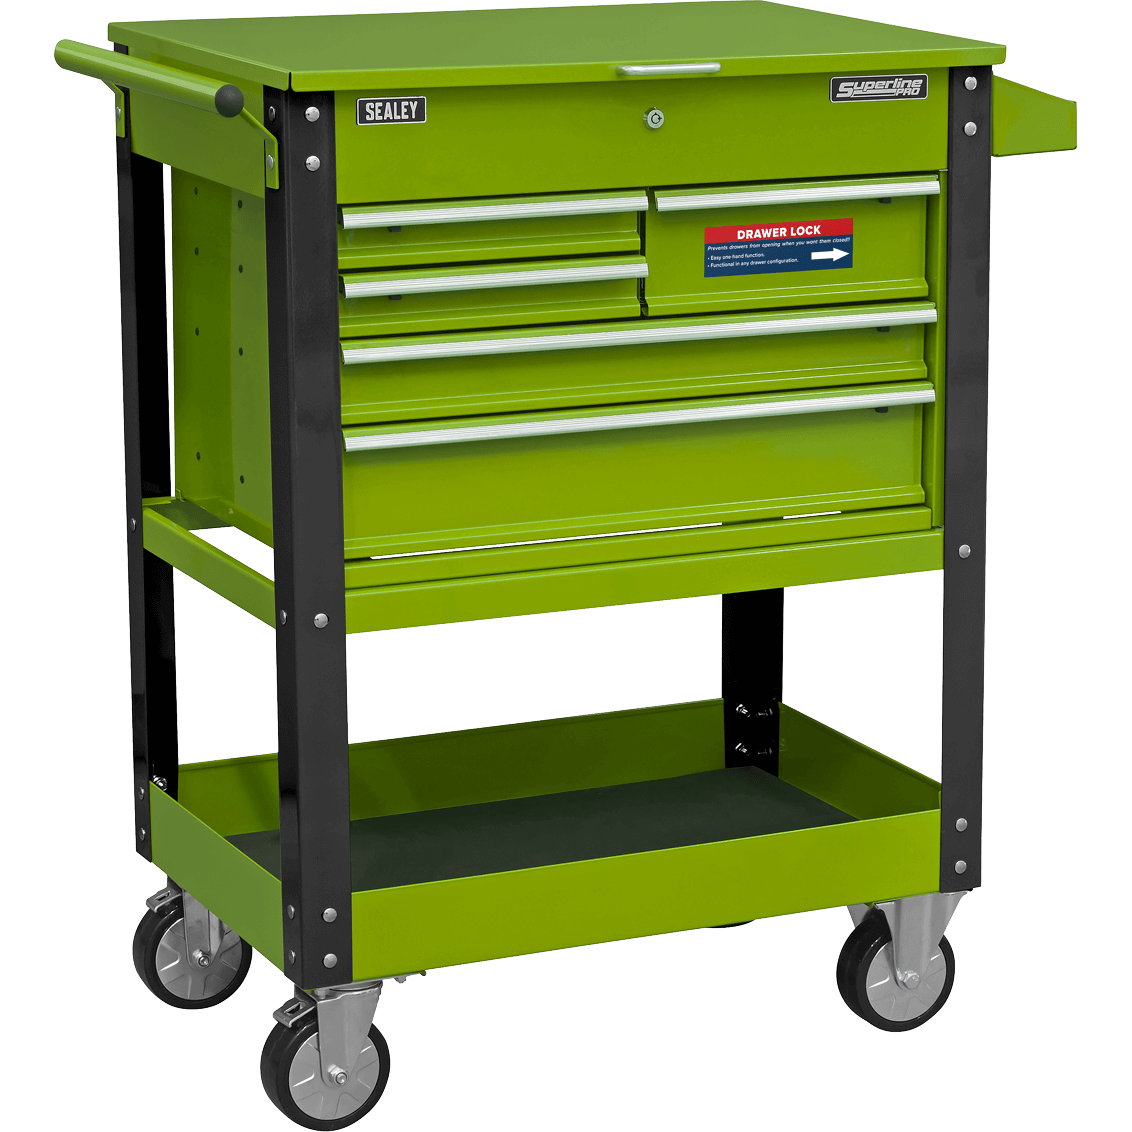 Sealey Heavy Duty 5 Drawer Tool and Parts Trolley Green